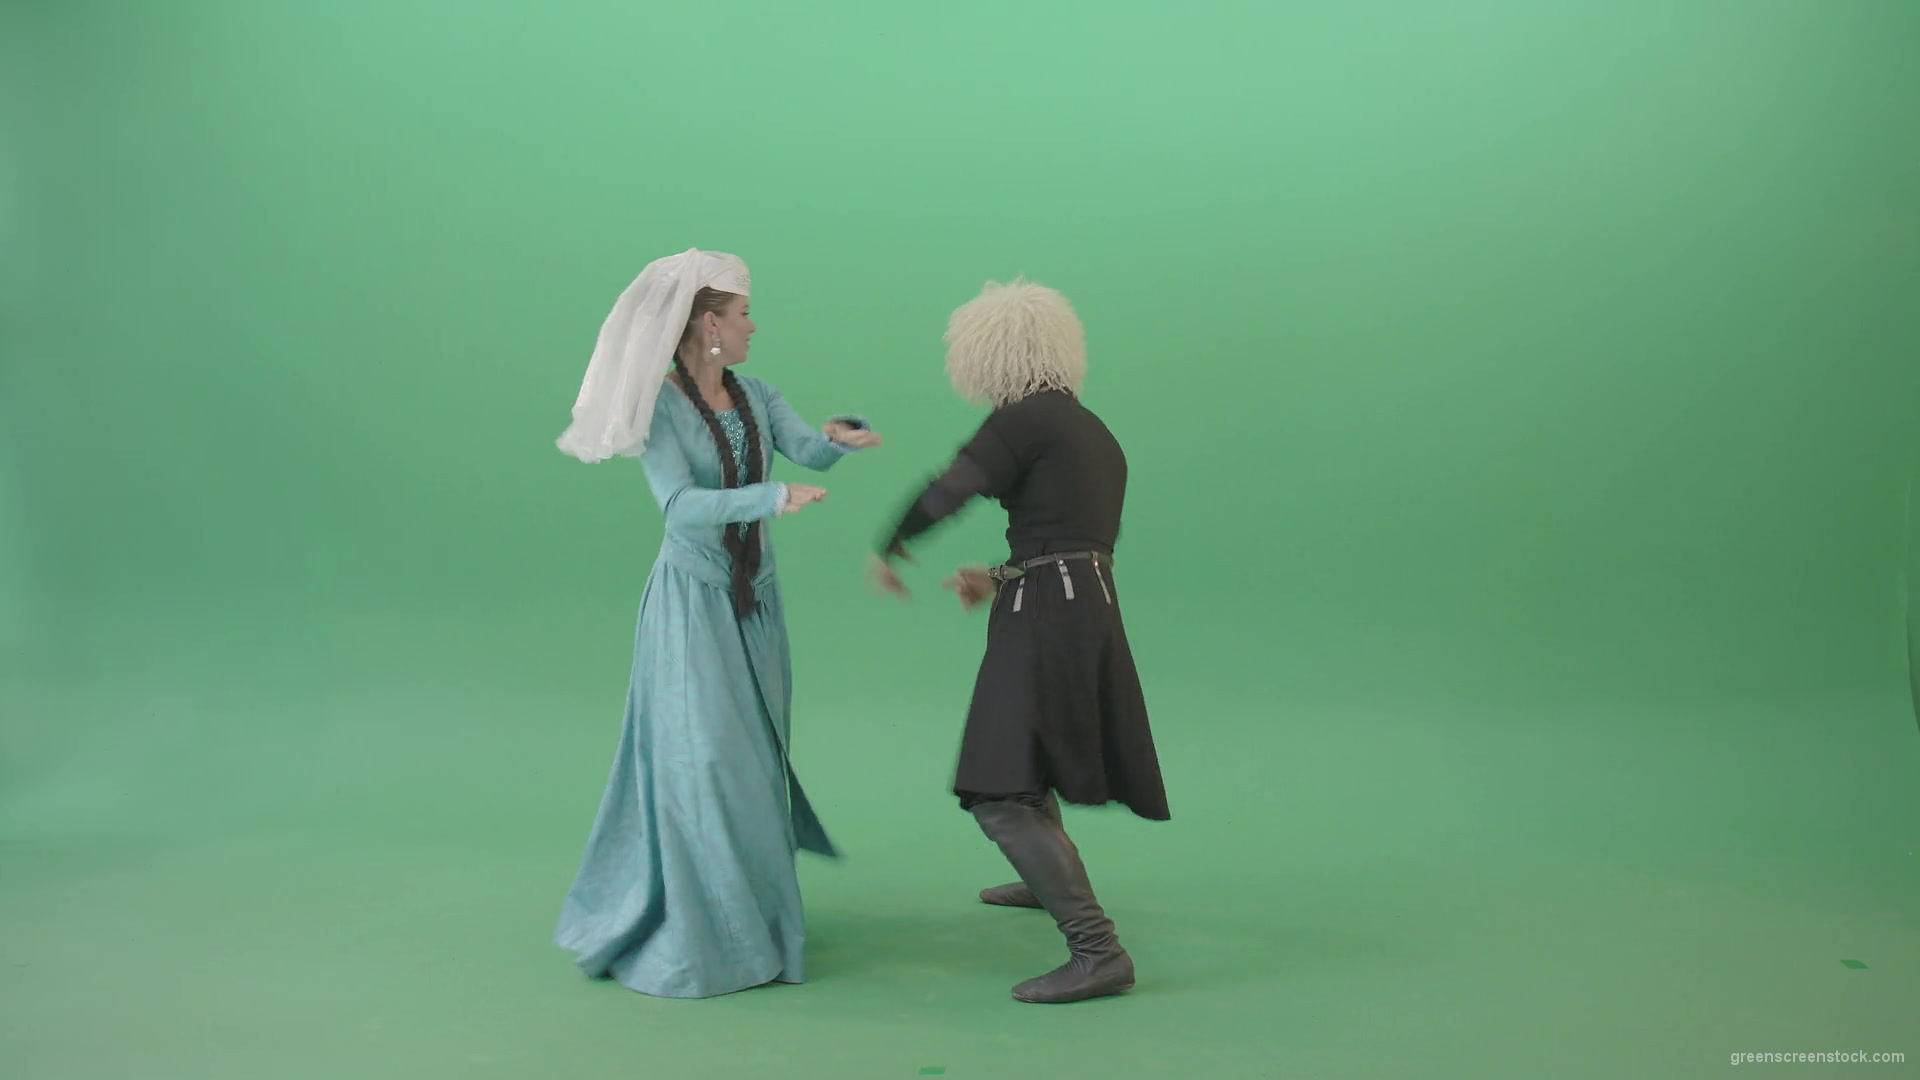 Gerogian-people-funny-dancing-with-smile-in-folk-dress-isolated-on-Green-Screen-4K-Video-Footage-1920_007 Green Screen Stock